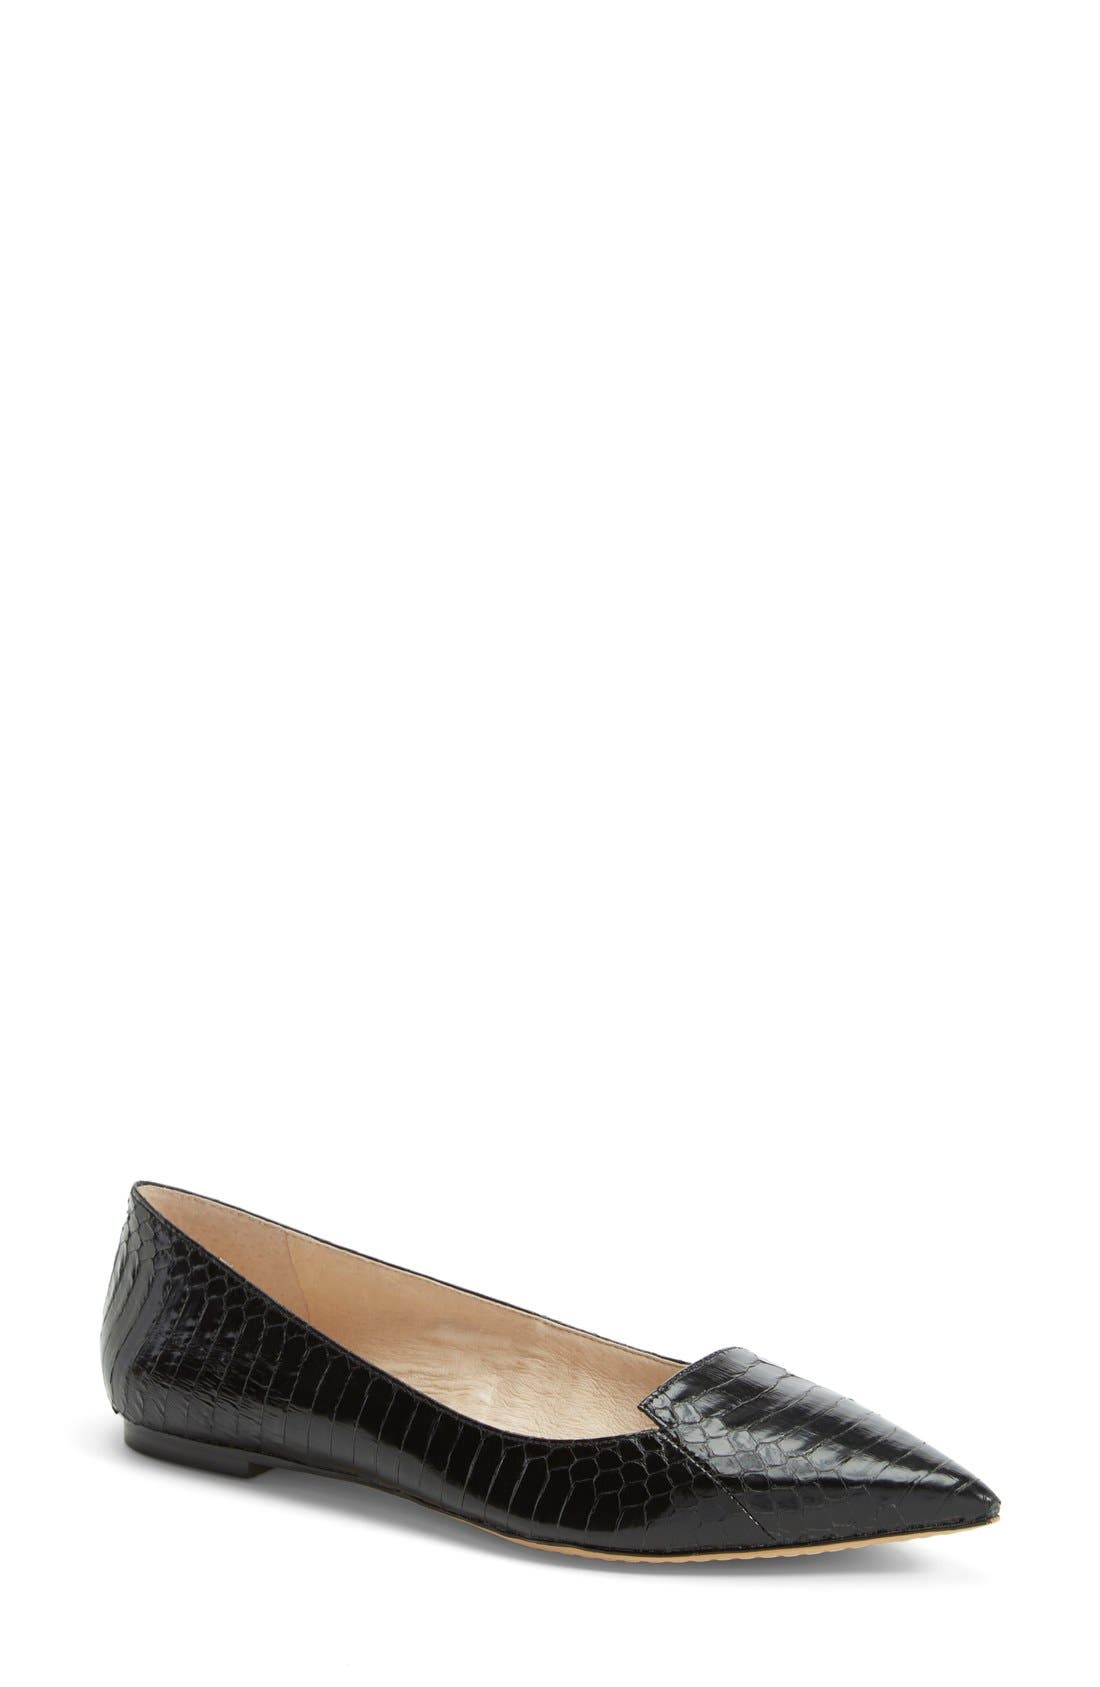 Vince Camuto 'Empa' Pointy Toe Loafer 